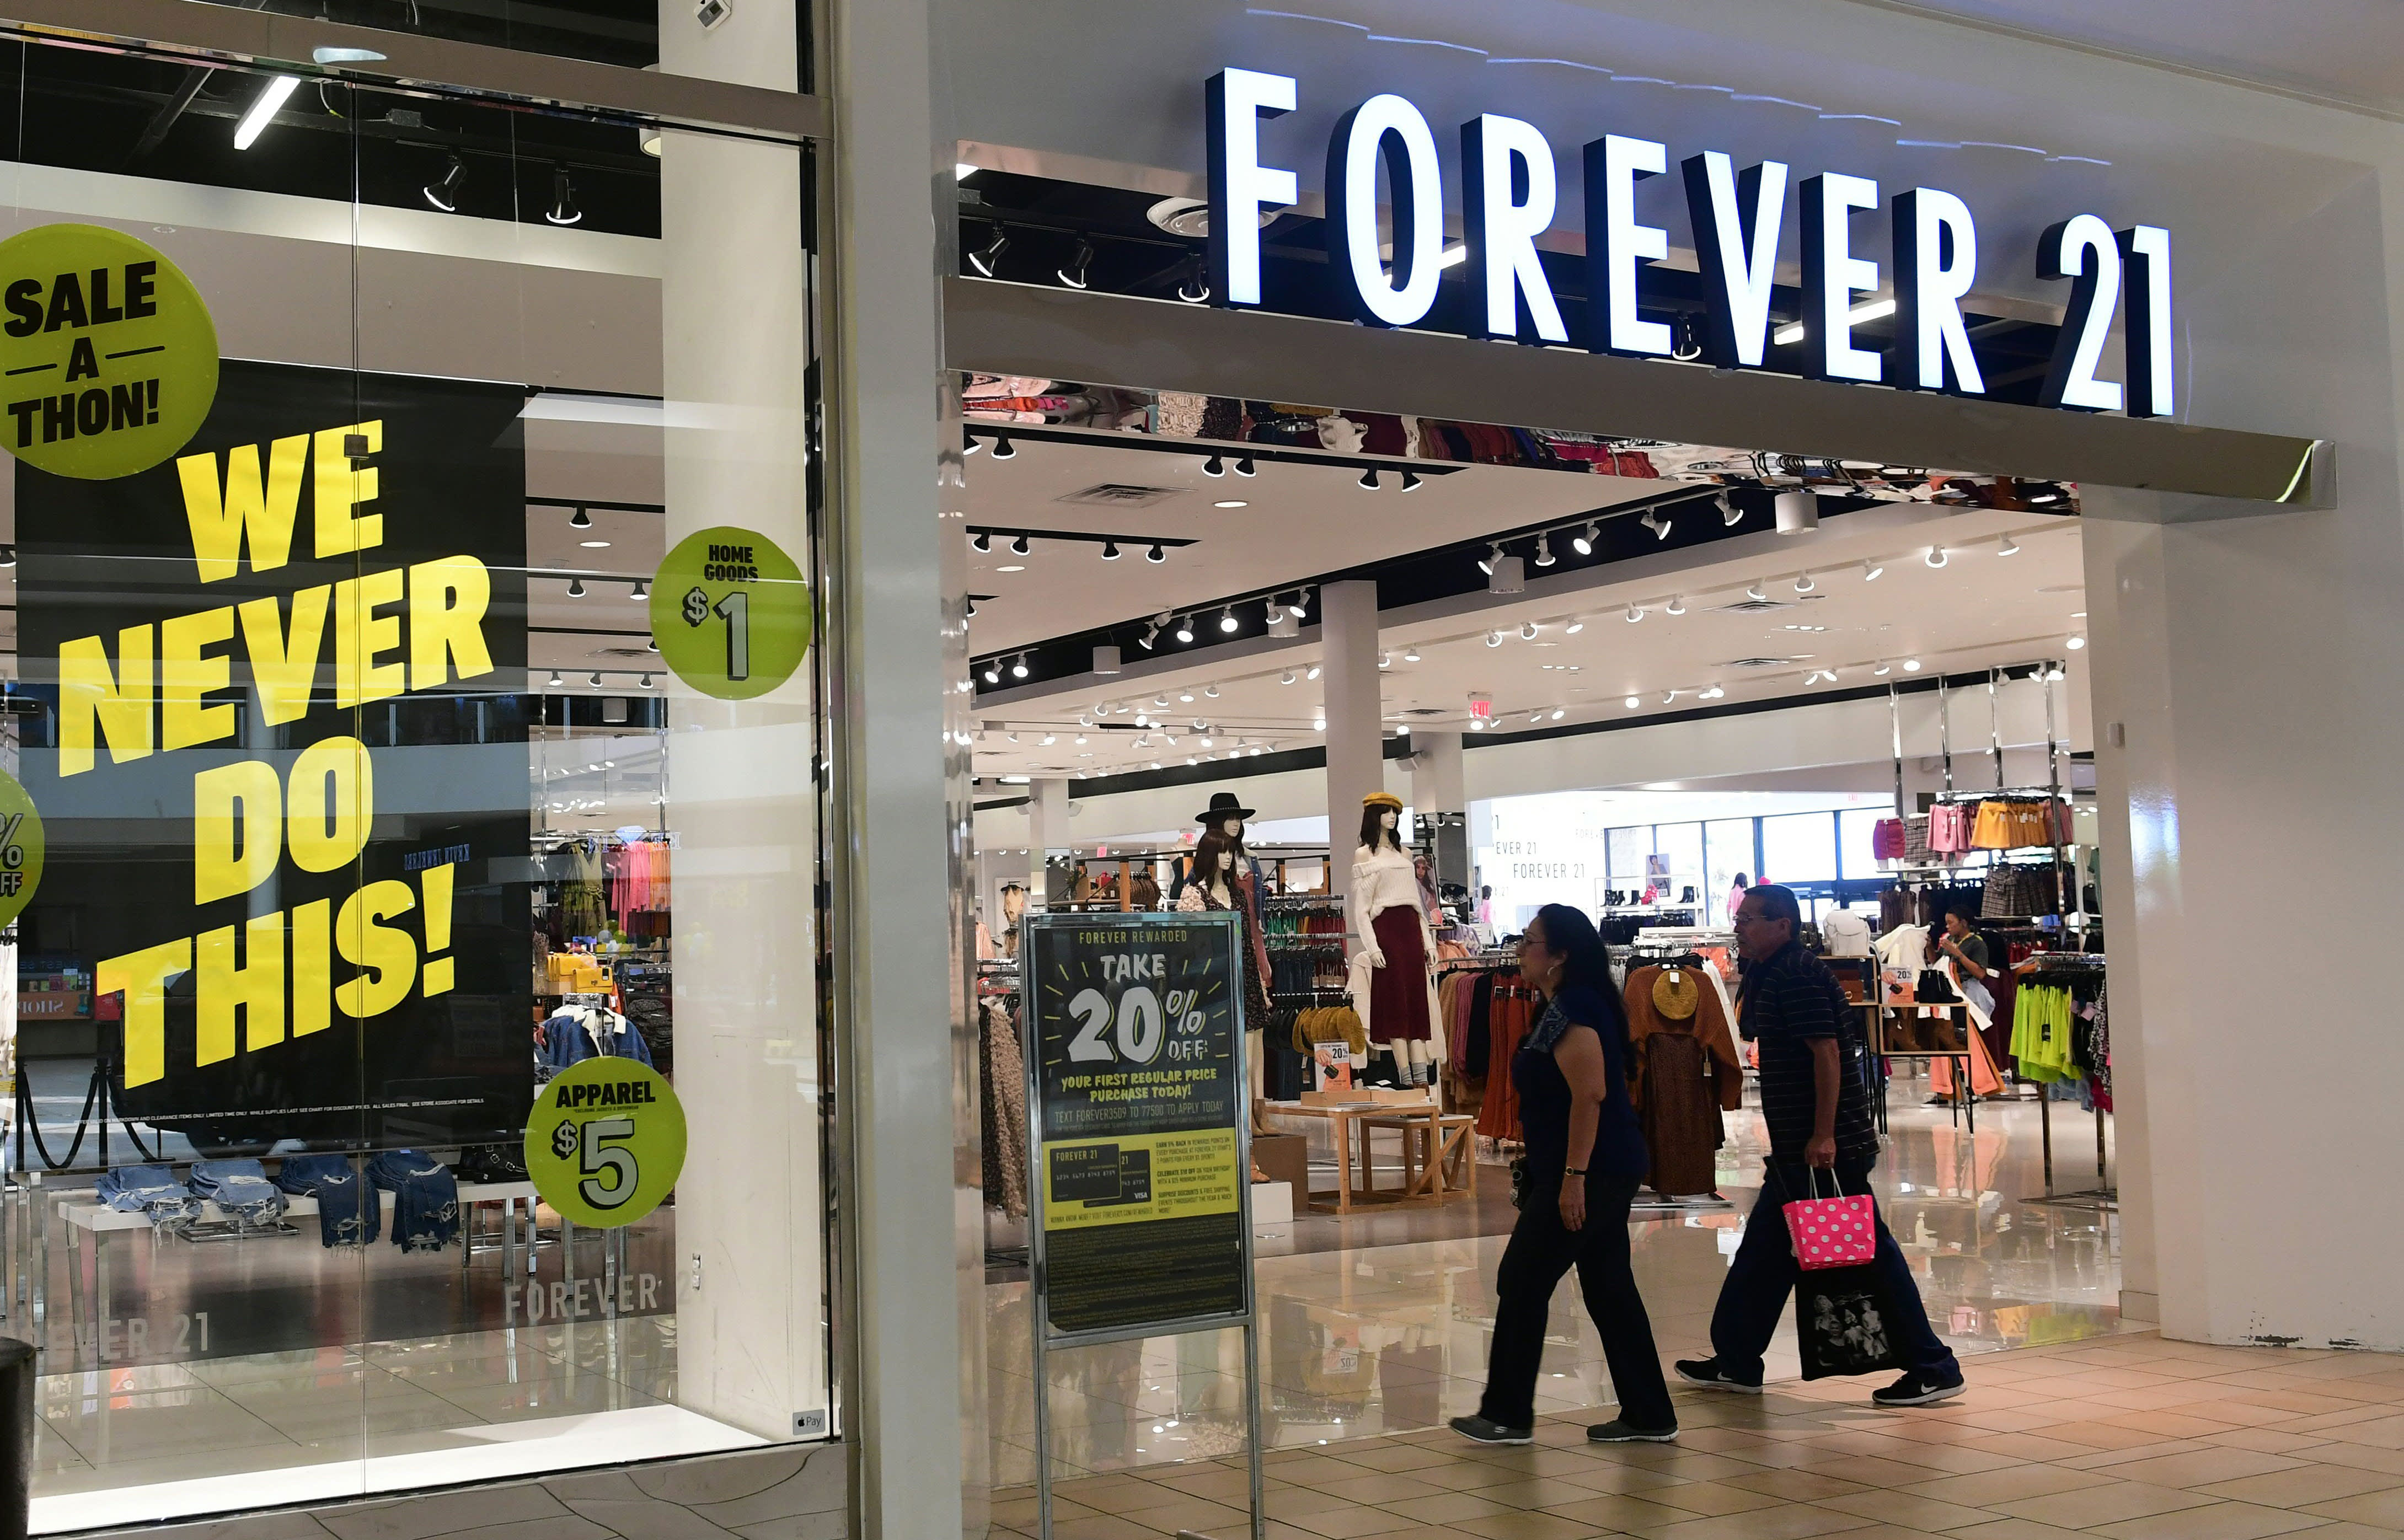 Forever 21 reaches deal to sell its retail business for 81 million